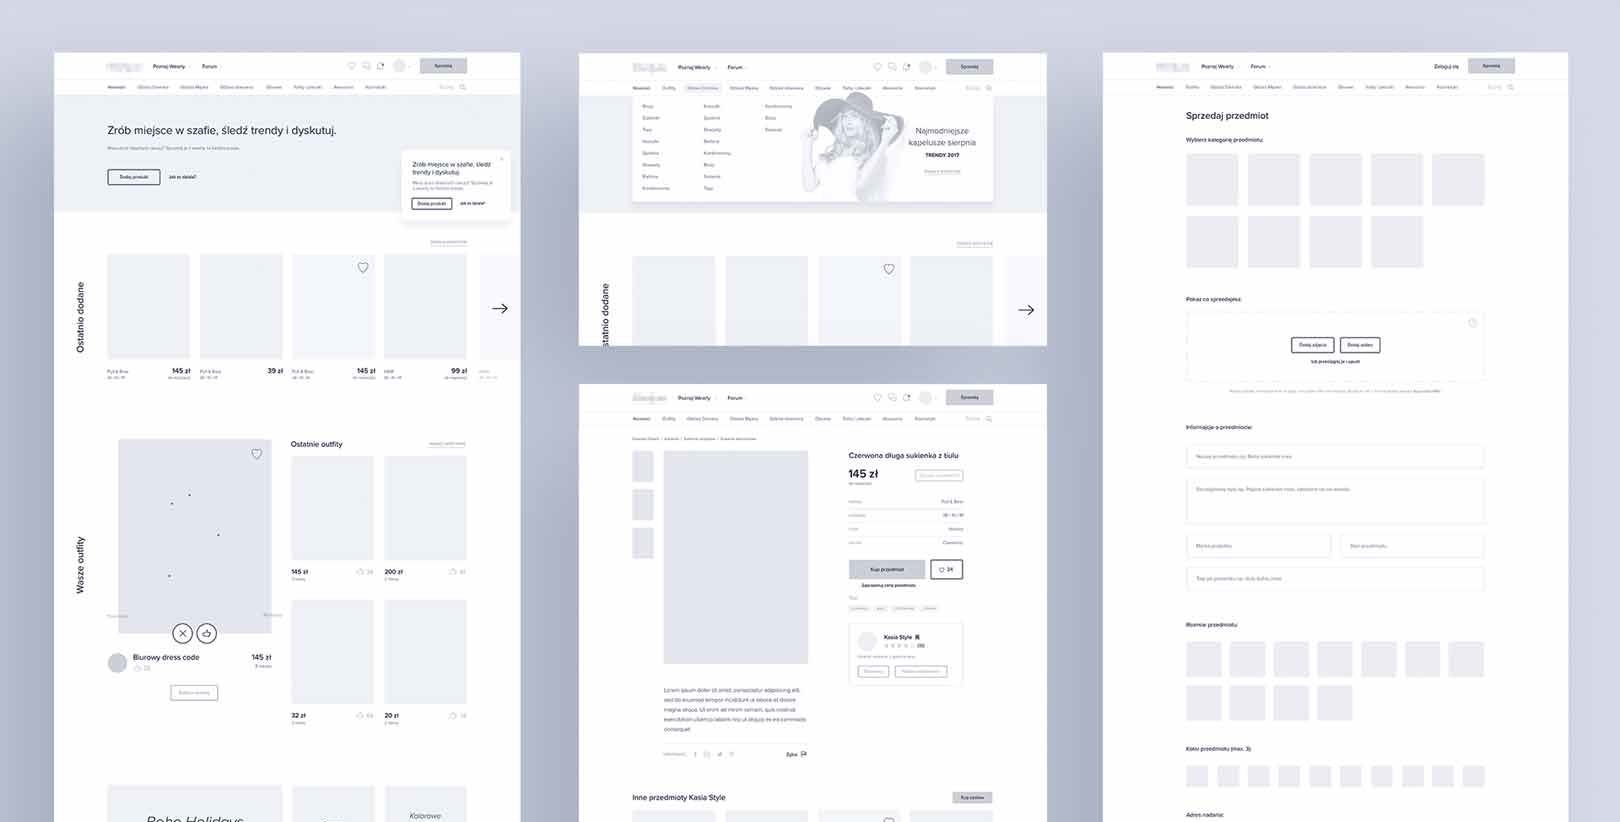 UX Wireframe examples by InVision